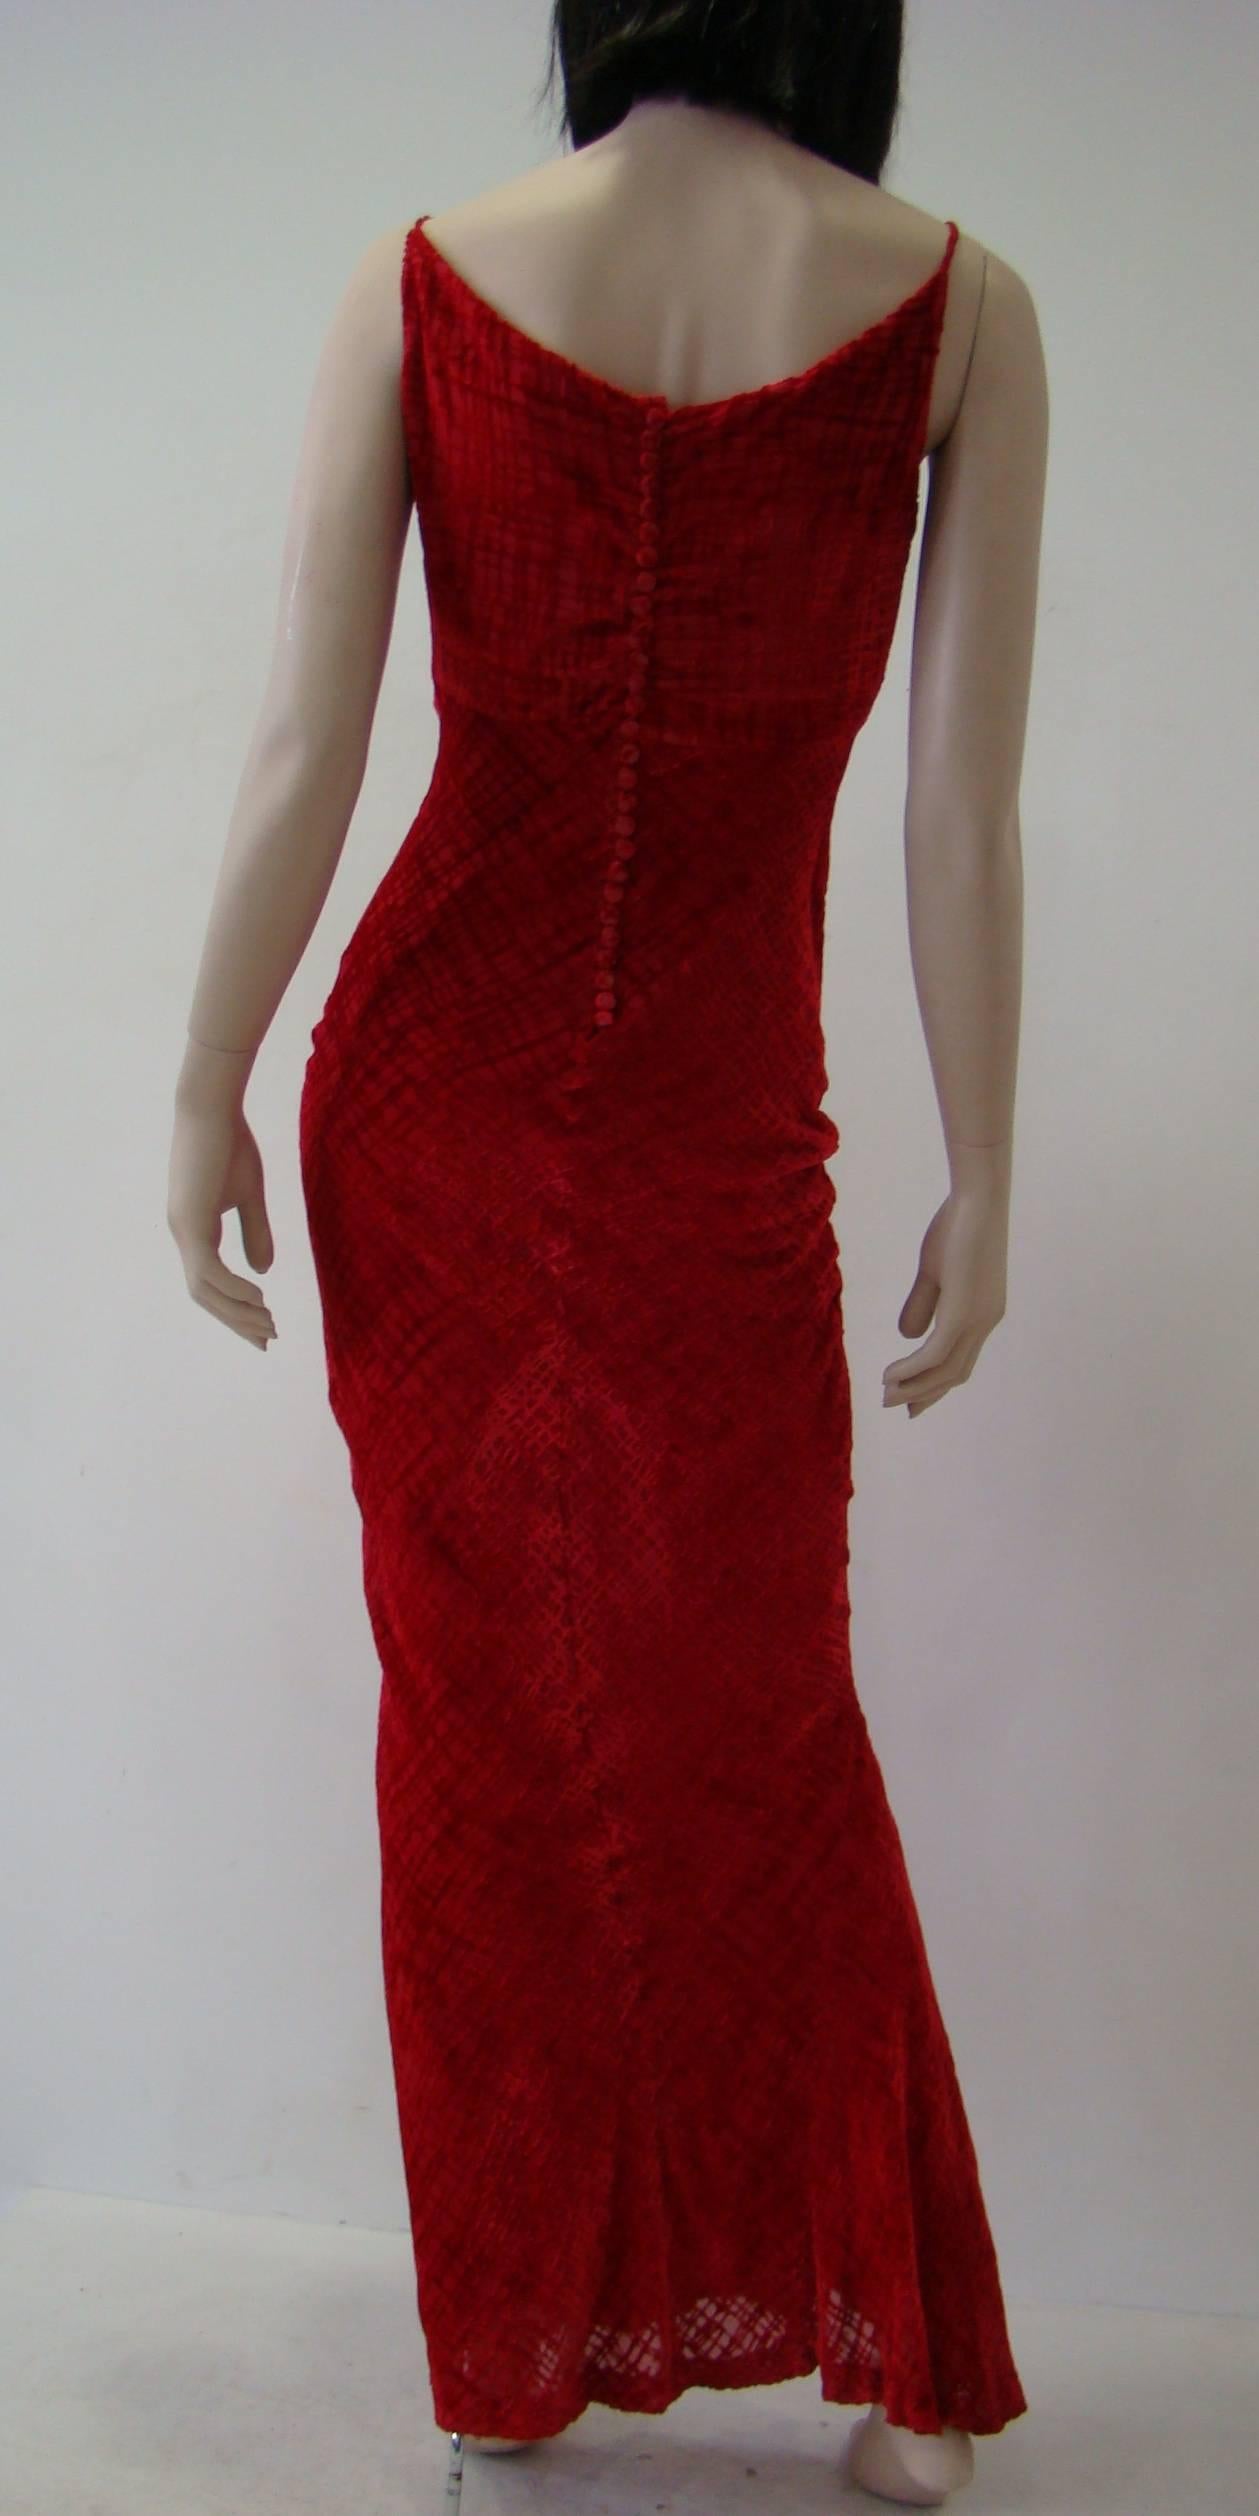 Unique Angelo Mozzillo Red Velvet Evening Gown Fall 1998 In Excellent Condition For Sale In Athens, Agia Paraskevi